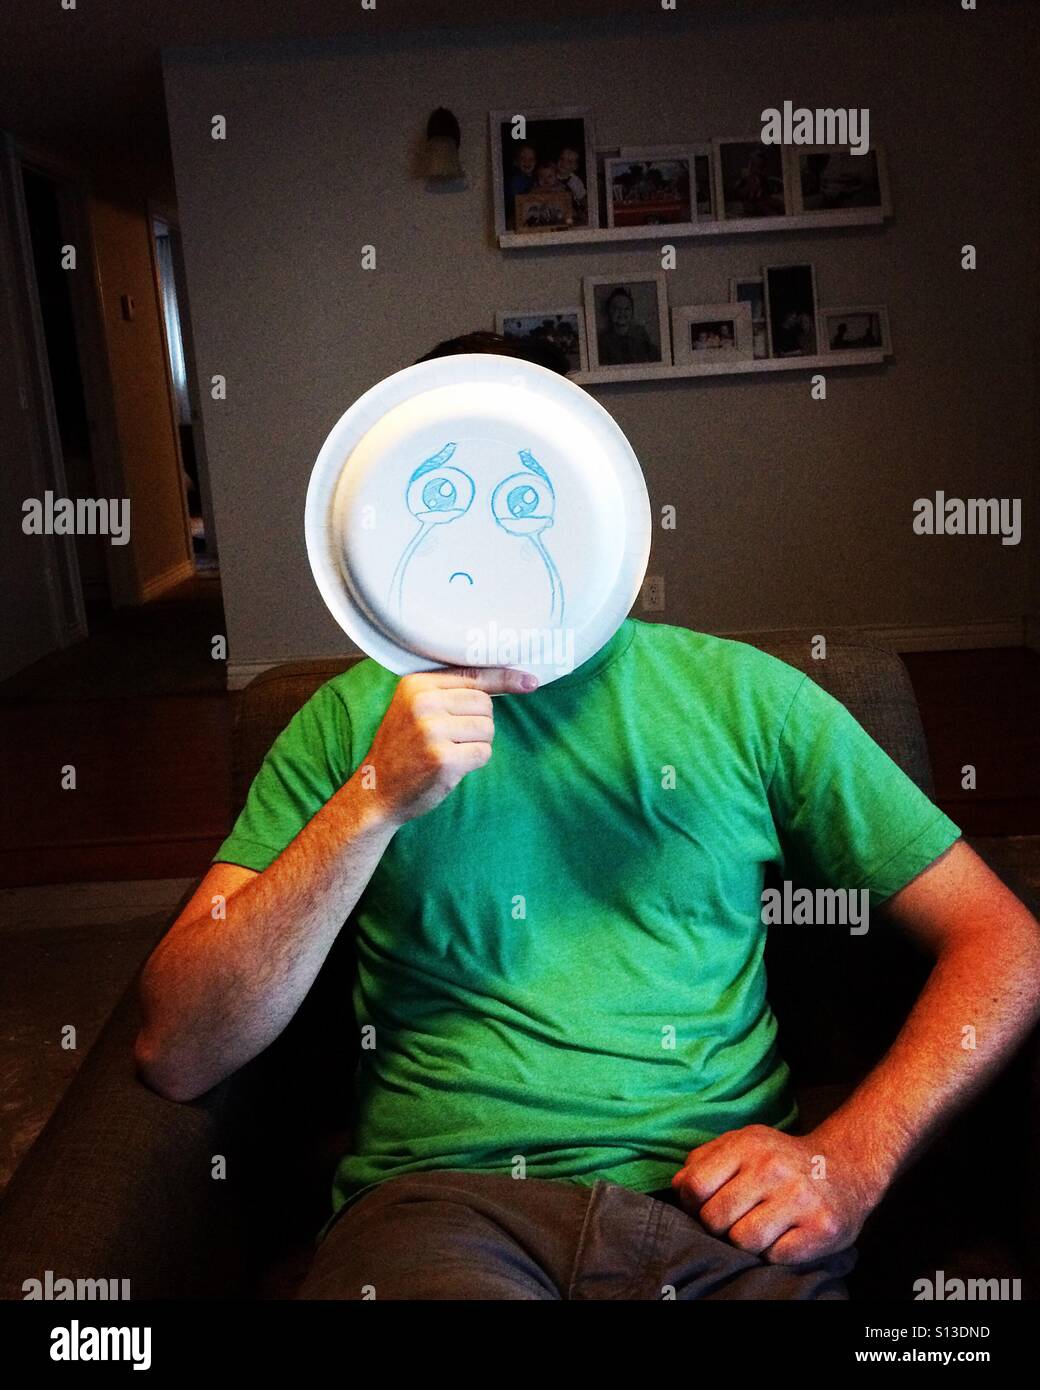 Man holding plate with a sad face drawn on it. Stock Photo